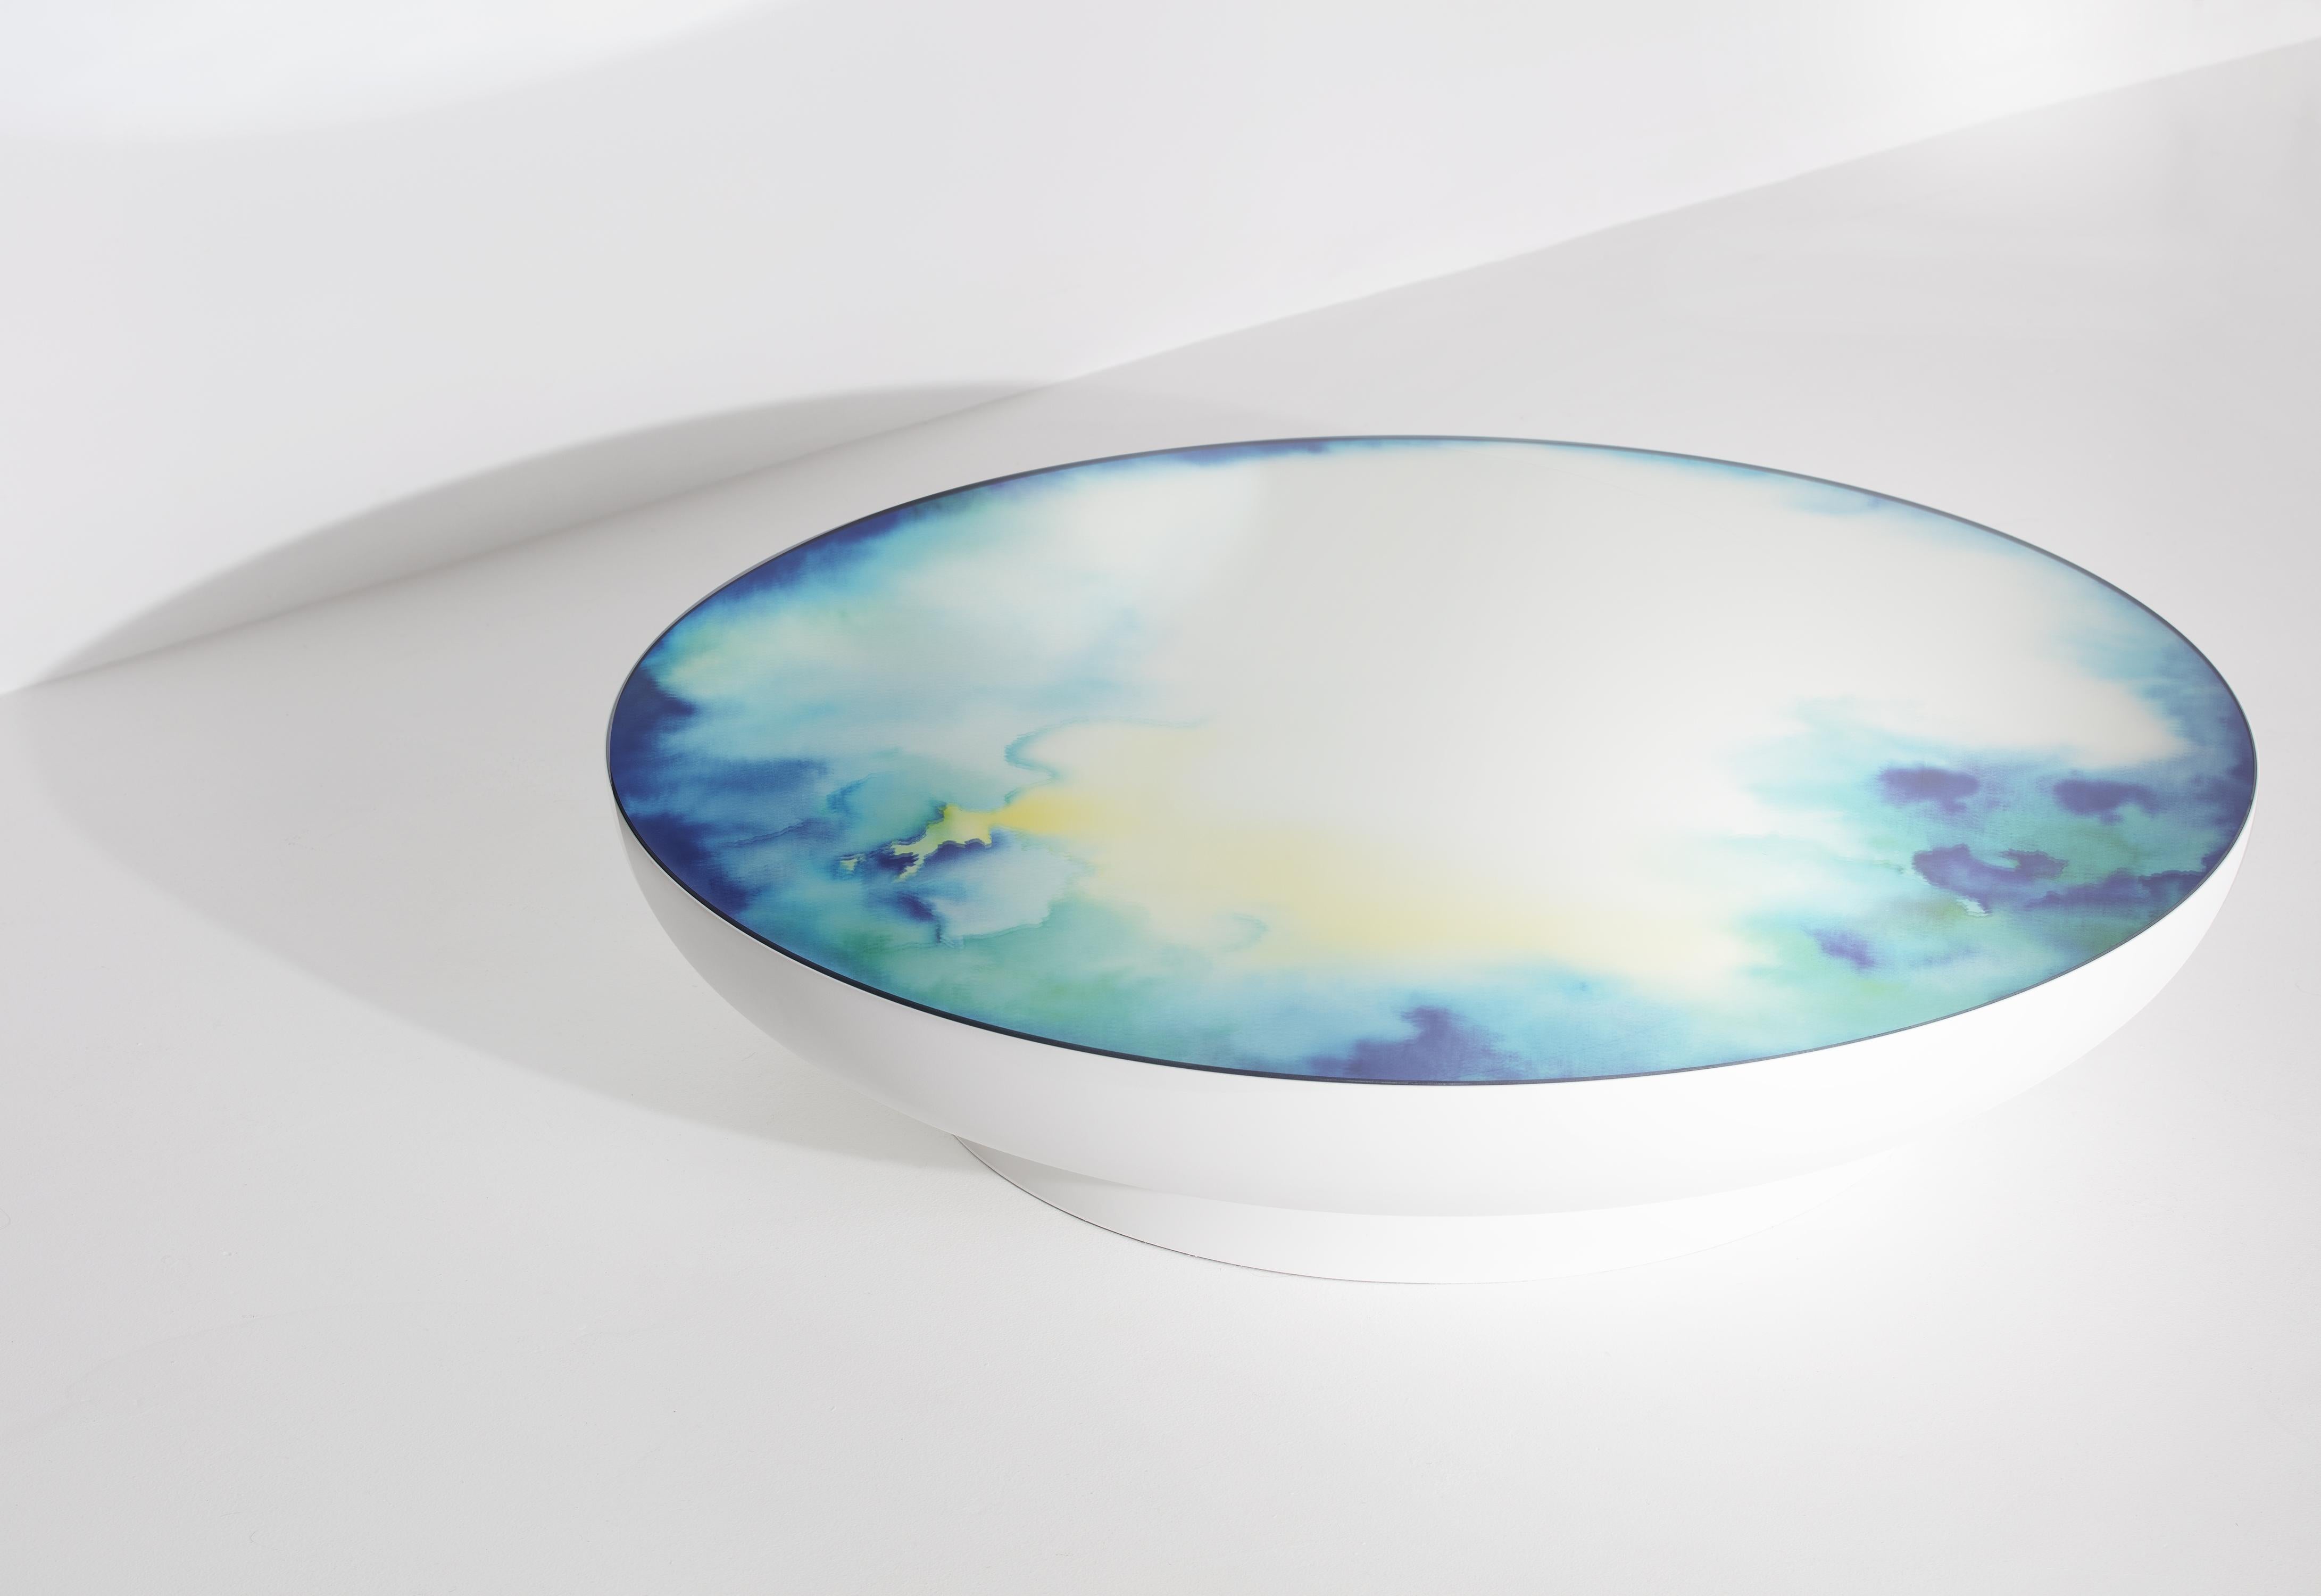 Petite Friture Extra Large Francis Coffee Table in White & Green Watercolour Mirror by Constance Guisset, 2018

Francis collection starts with a painter brush resting in a glass of water, when watercolour pigments reveal shifting drawings.